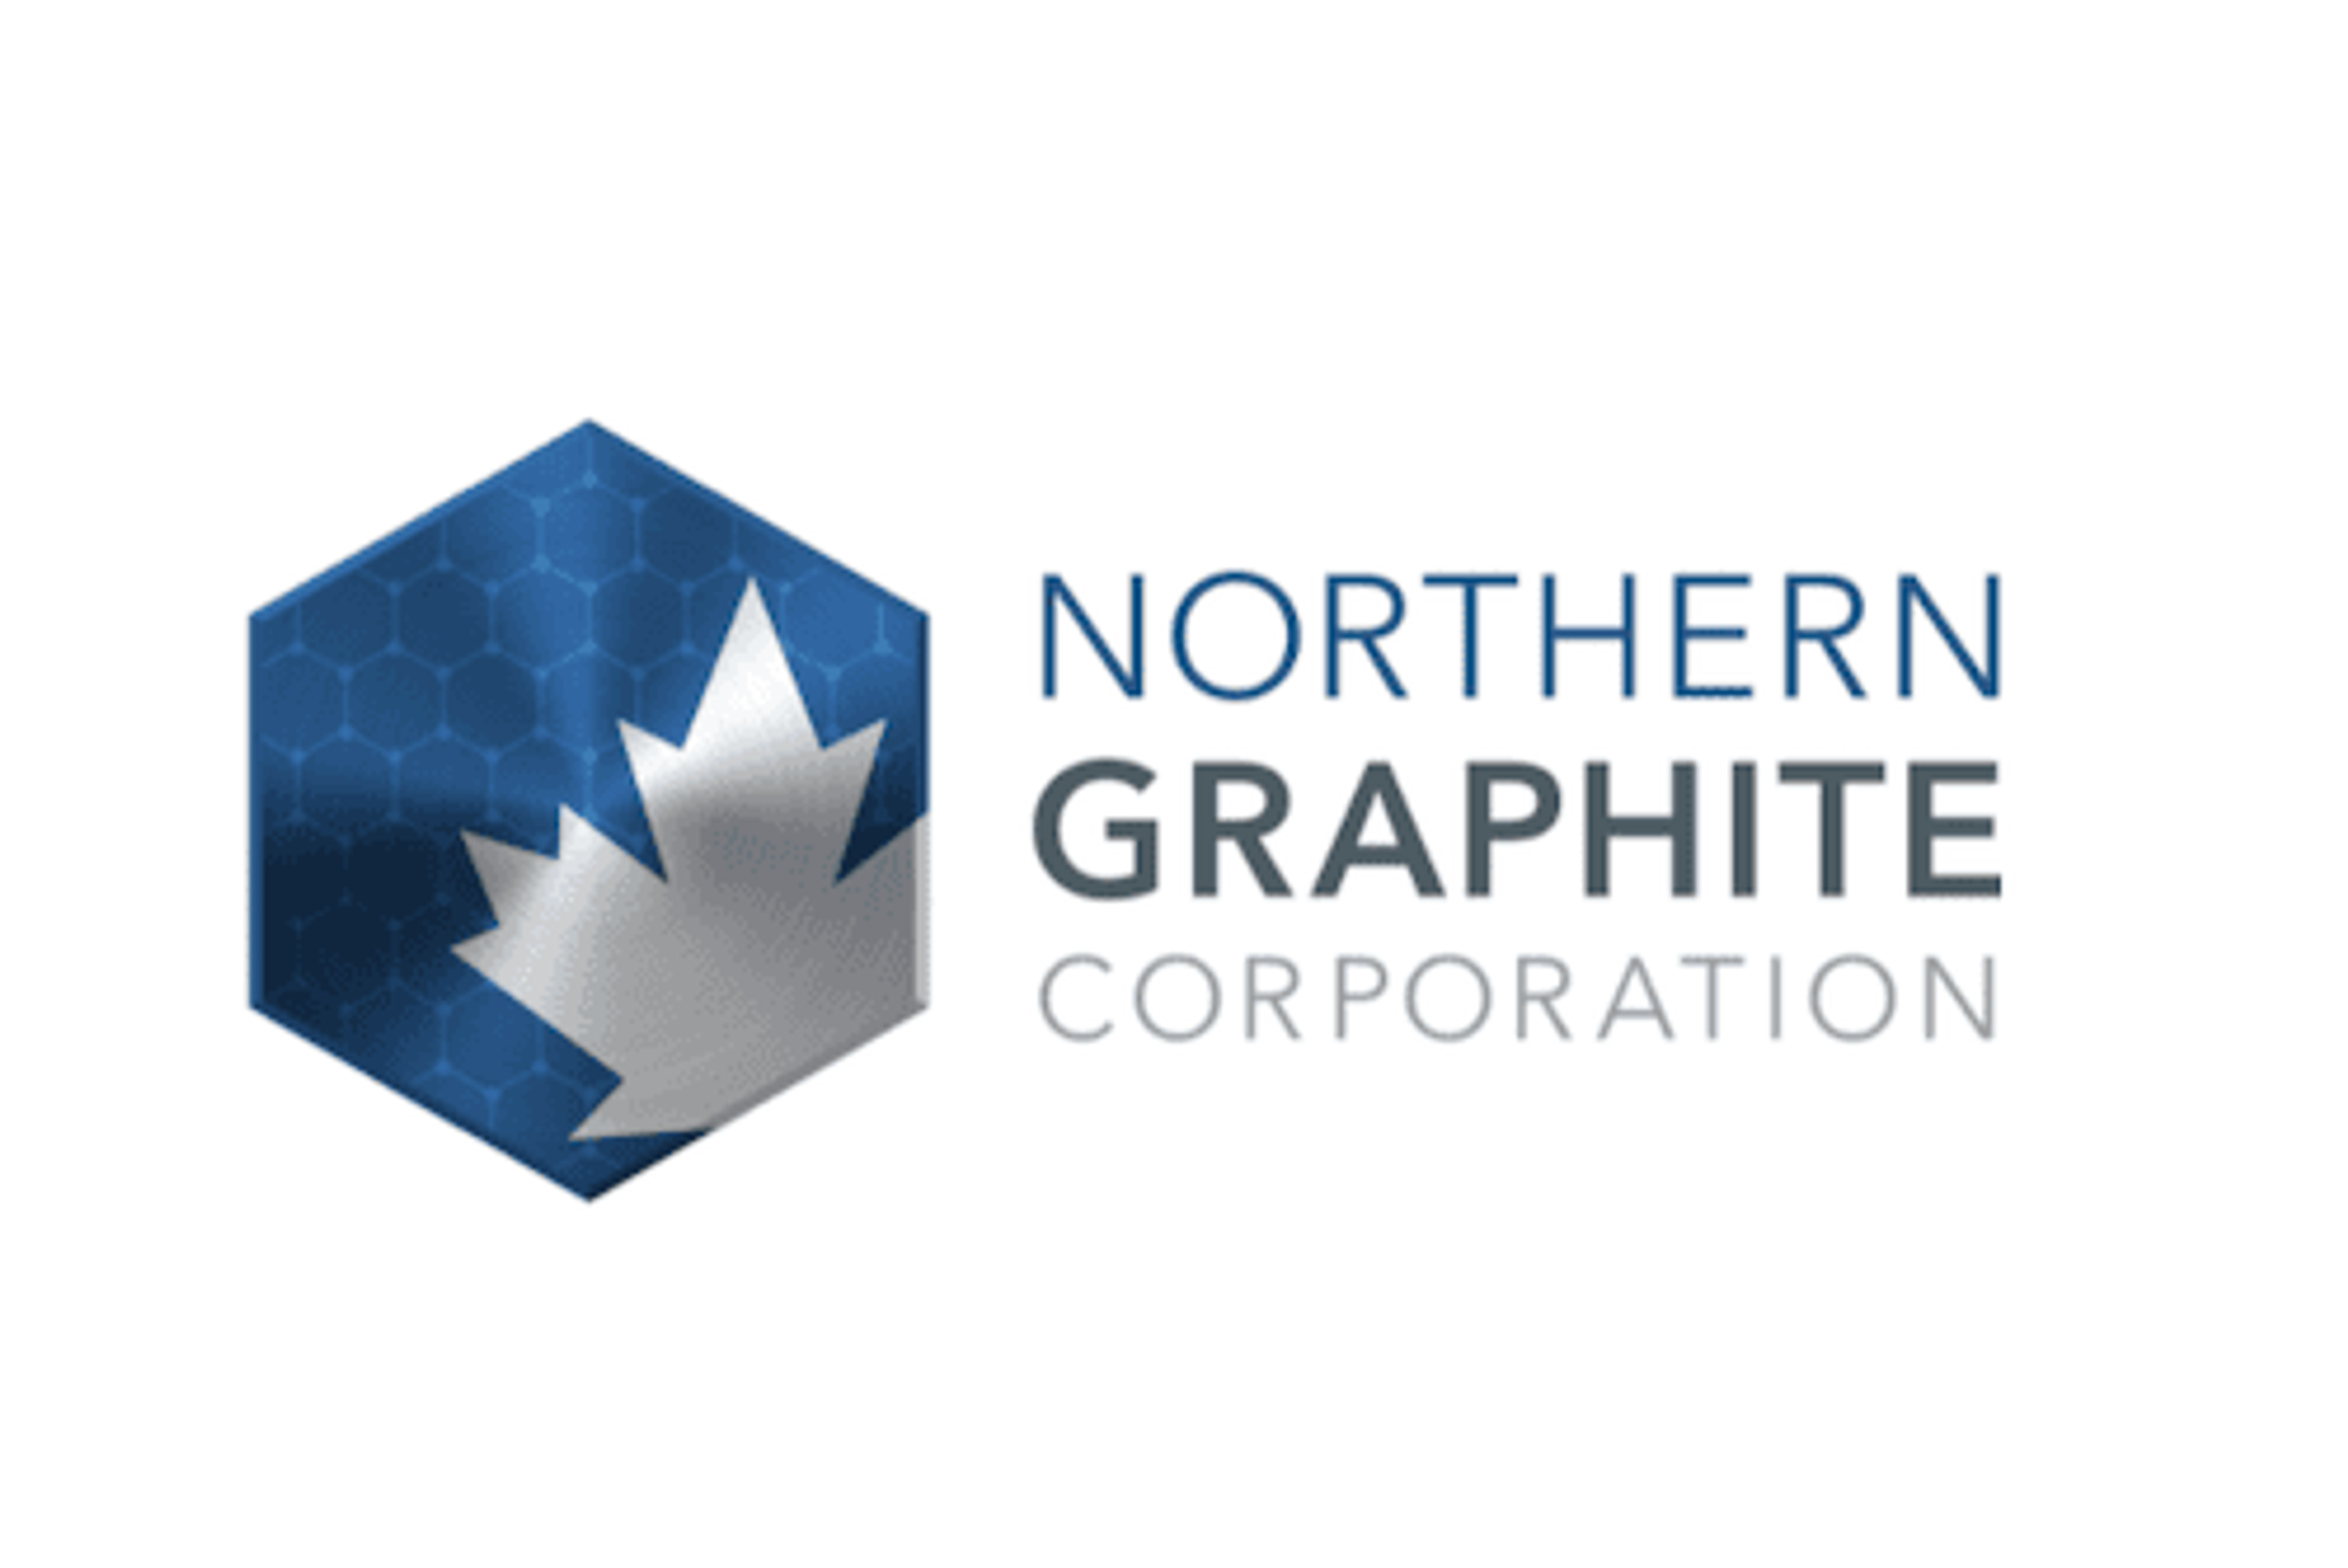 Northern Graphite Well Positioned to Benefit From New Critical Minerals Developments in Ontario